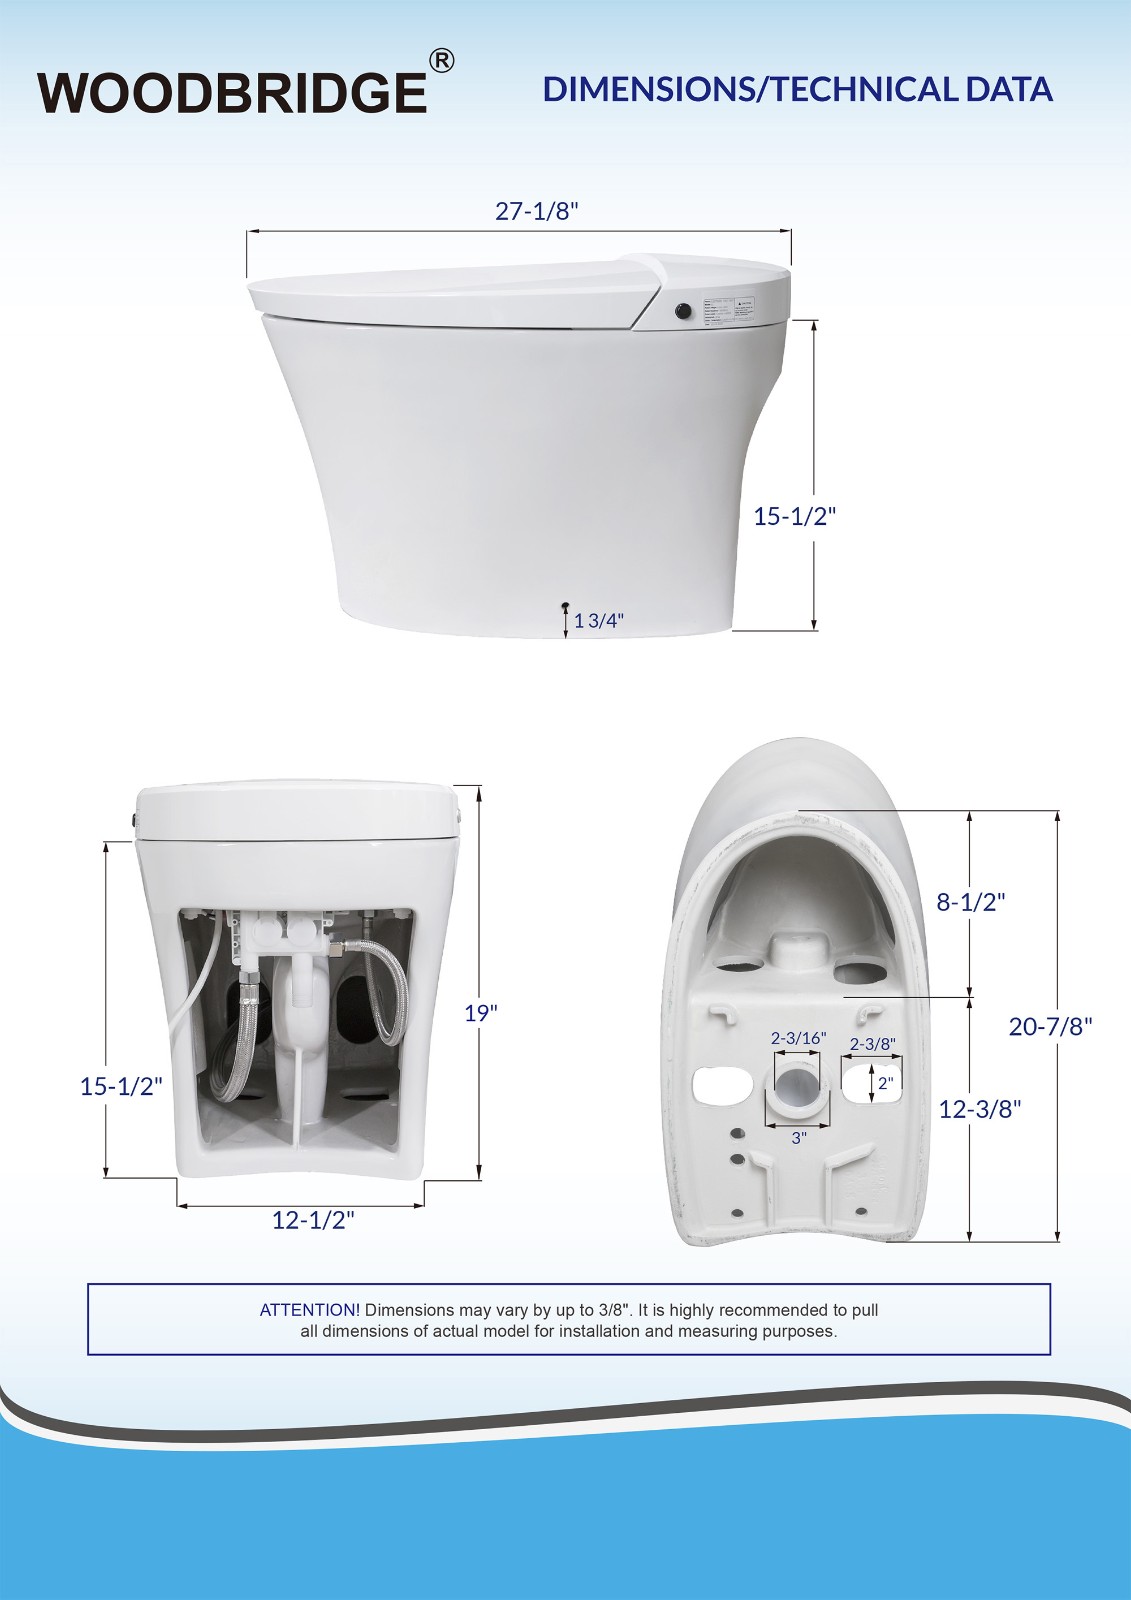  WOODBRIDGE B0970S-1.0(no foot sensor) Smart Bidet Toilet Elongated One Piece Modern Design, Heated Seat with Integrated Multi Function Remote Control, White_8445